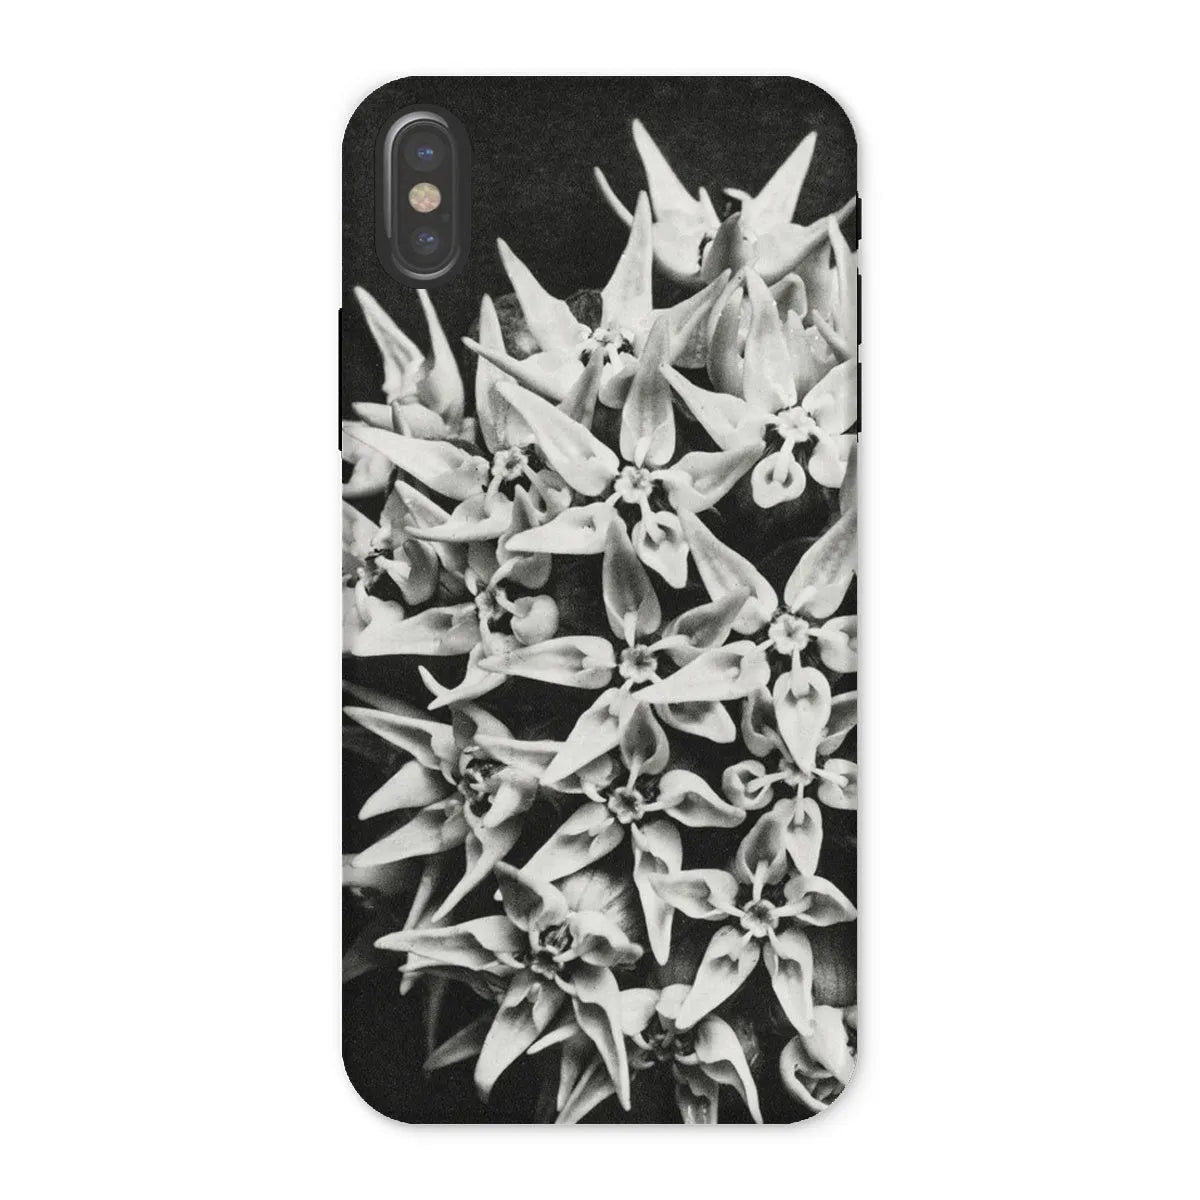 Asclepias Speciosa (showy Milkweed) By Karl Blossfeldt Tough Phone Case - Iphone x / Matte - Mobile Phone Cases